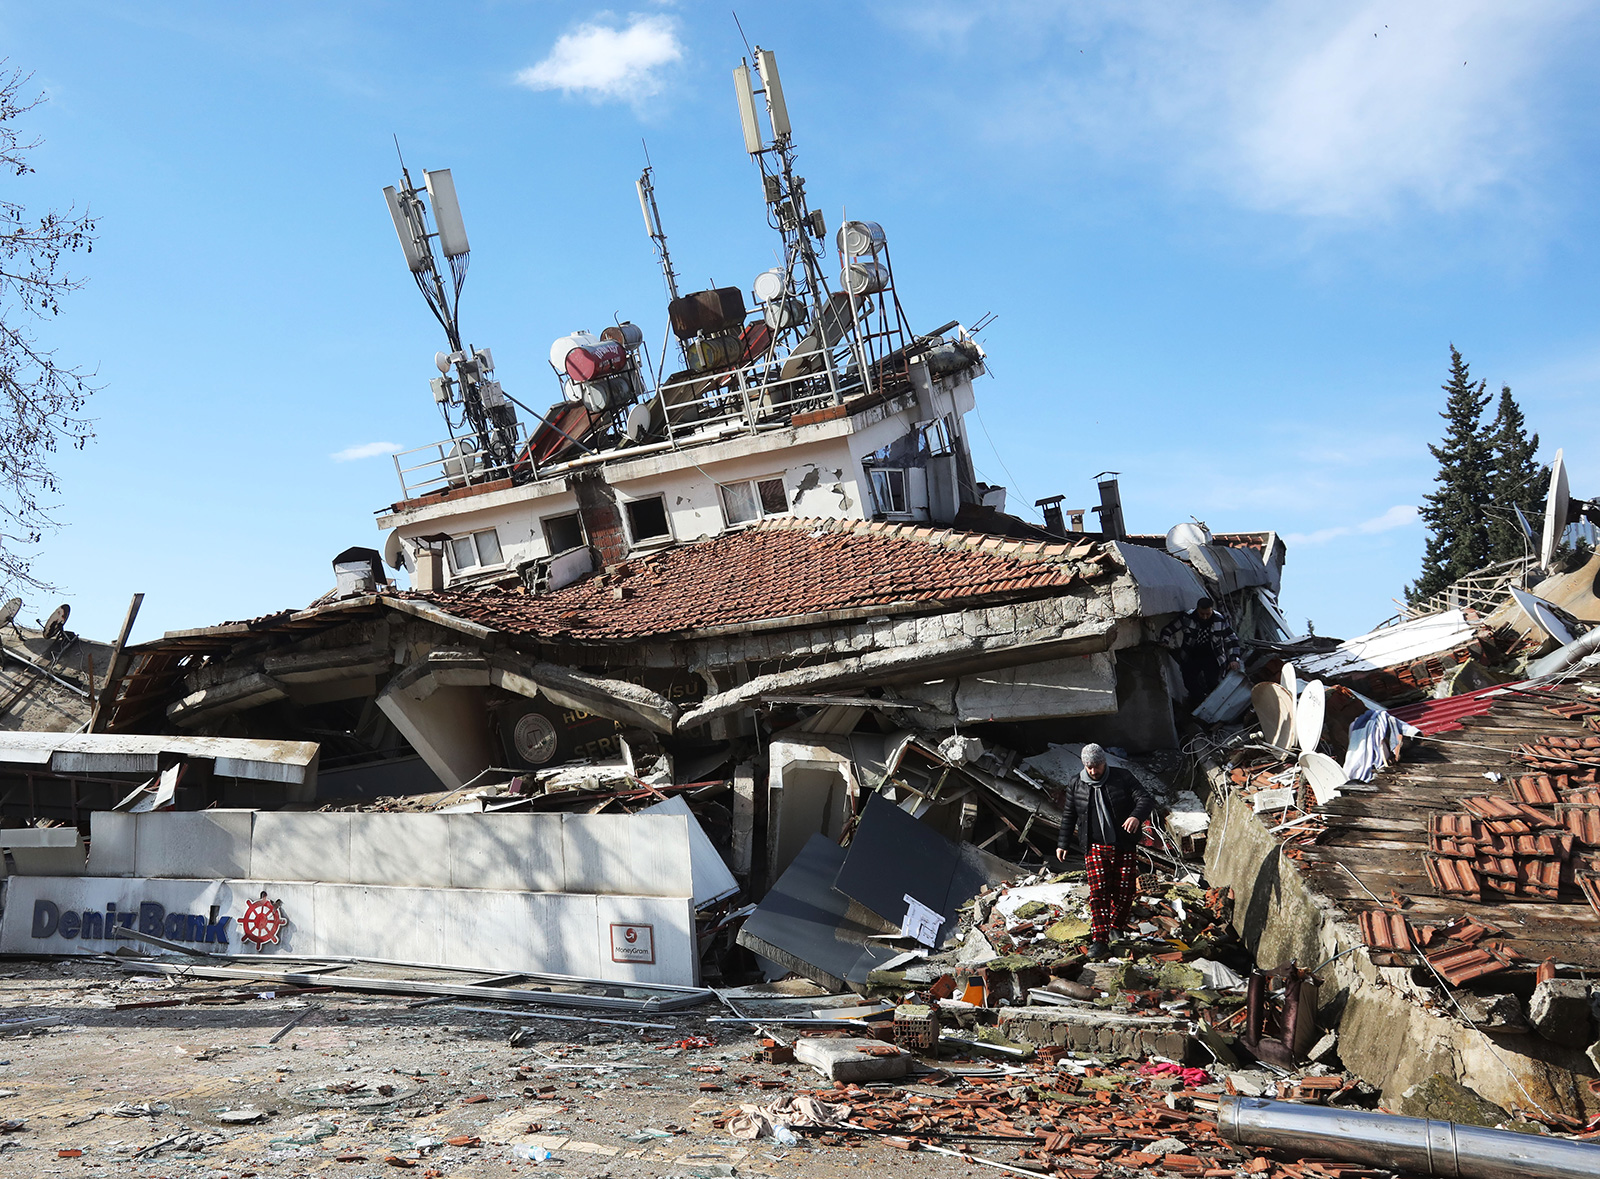 A man walks through the wreckage of a collapsed building in Maras, Turkey, on February 7.